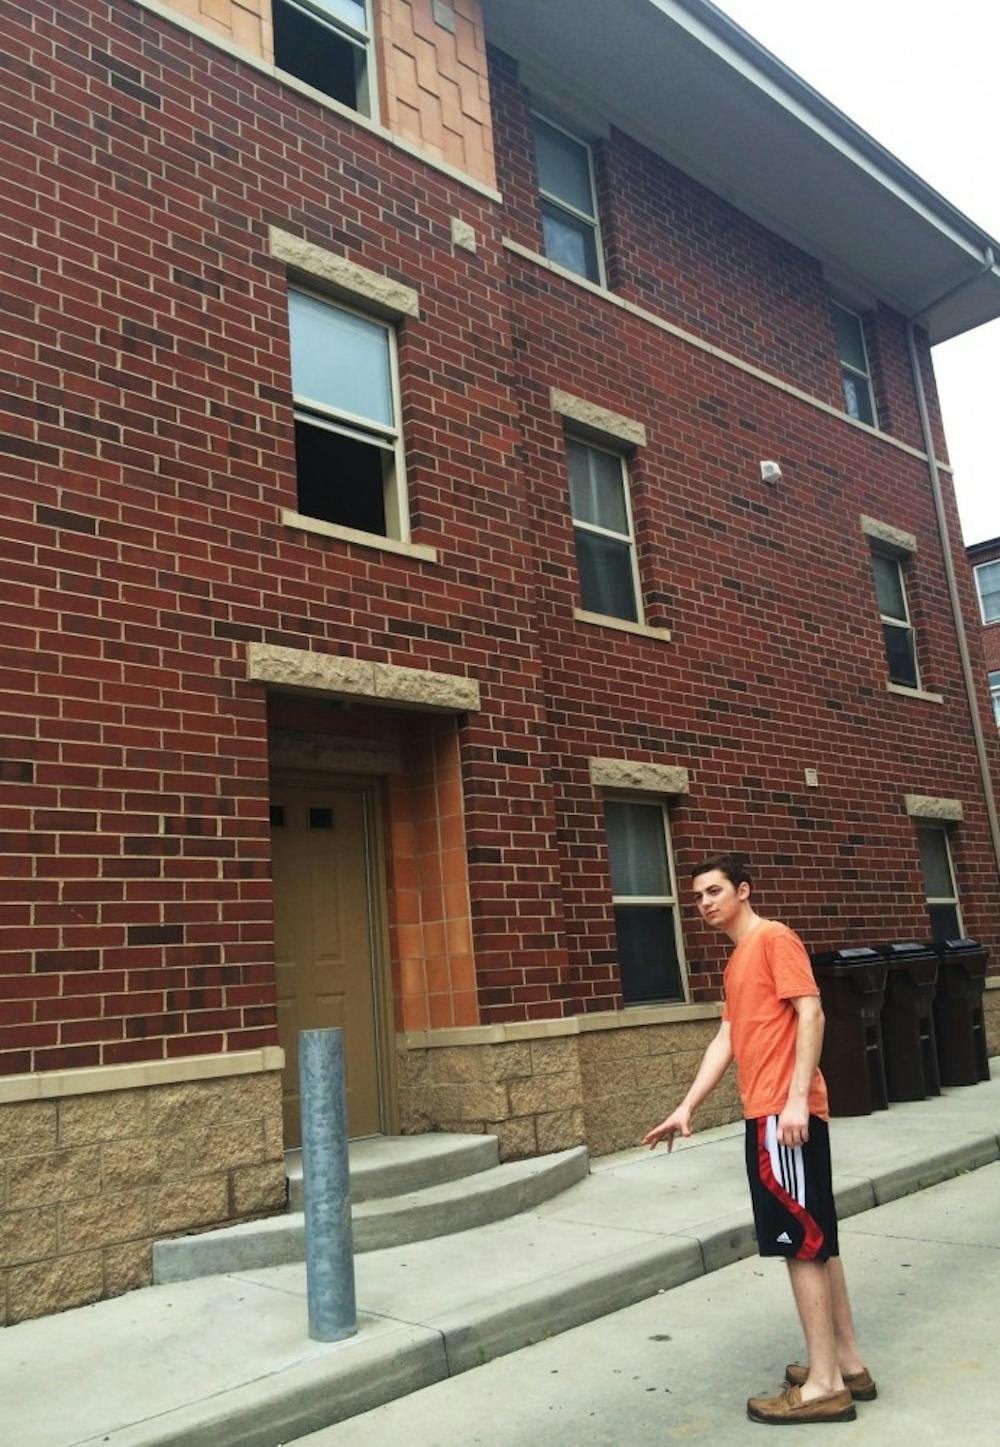 Alex Proctor points to the spot he found sophomore Caroline O’Donnell after she fell out of the third-story window above